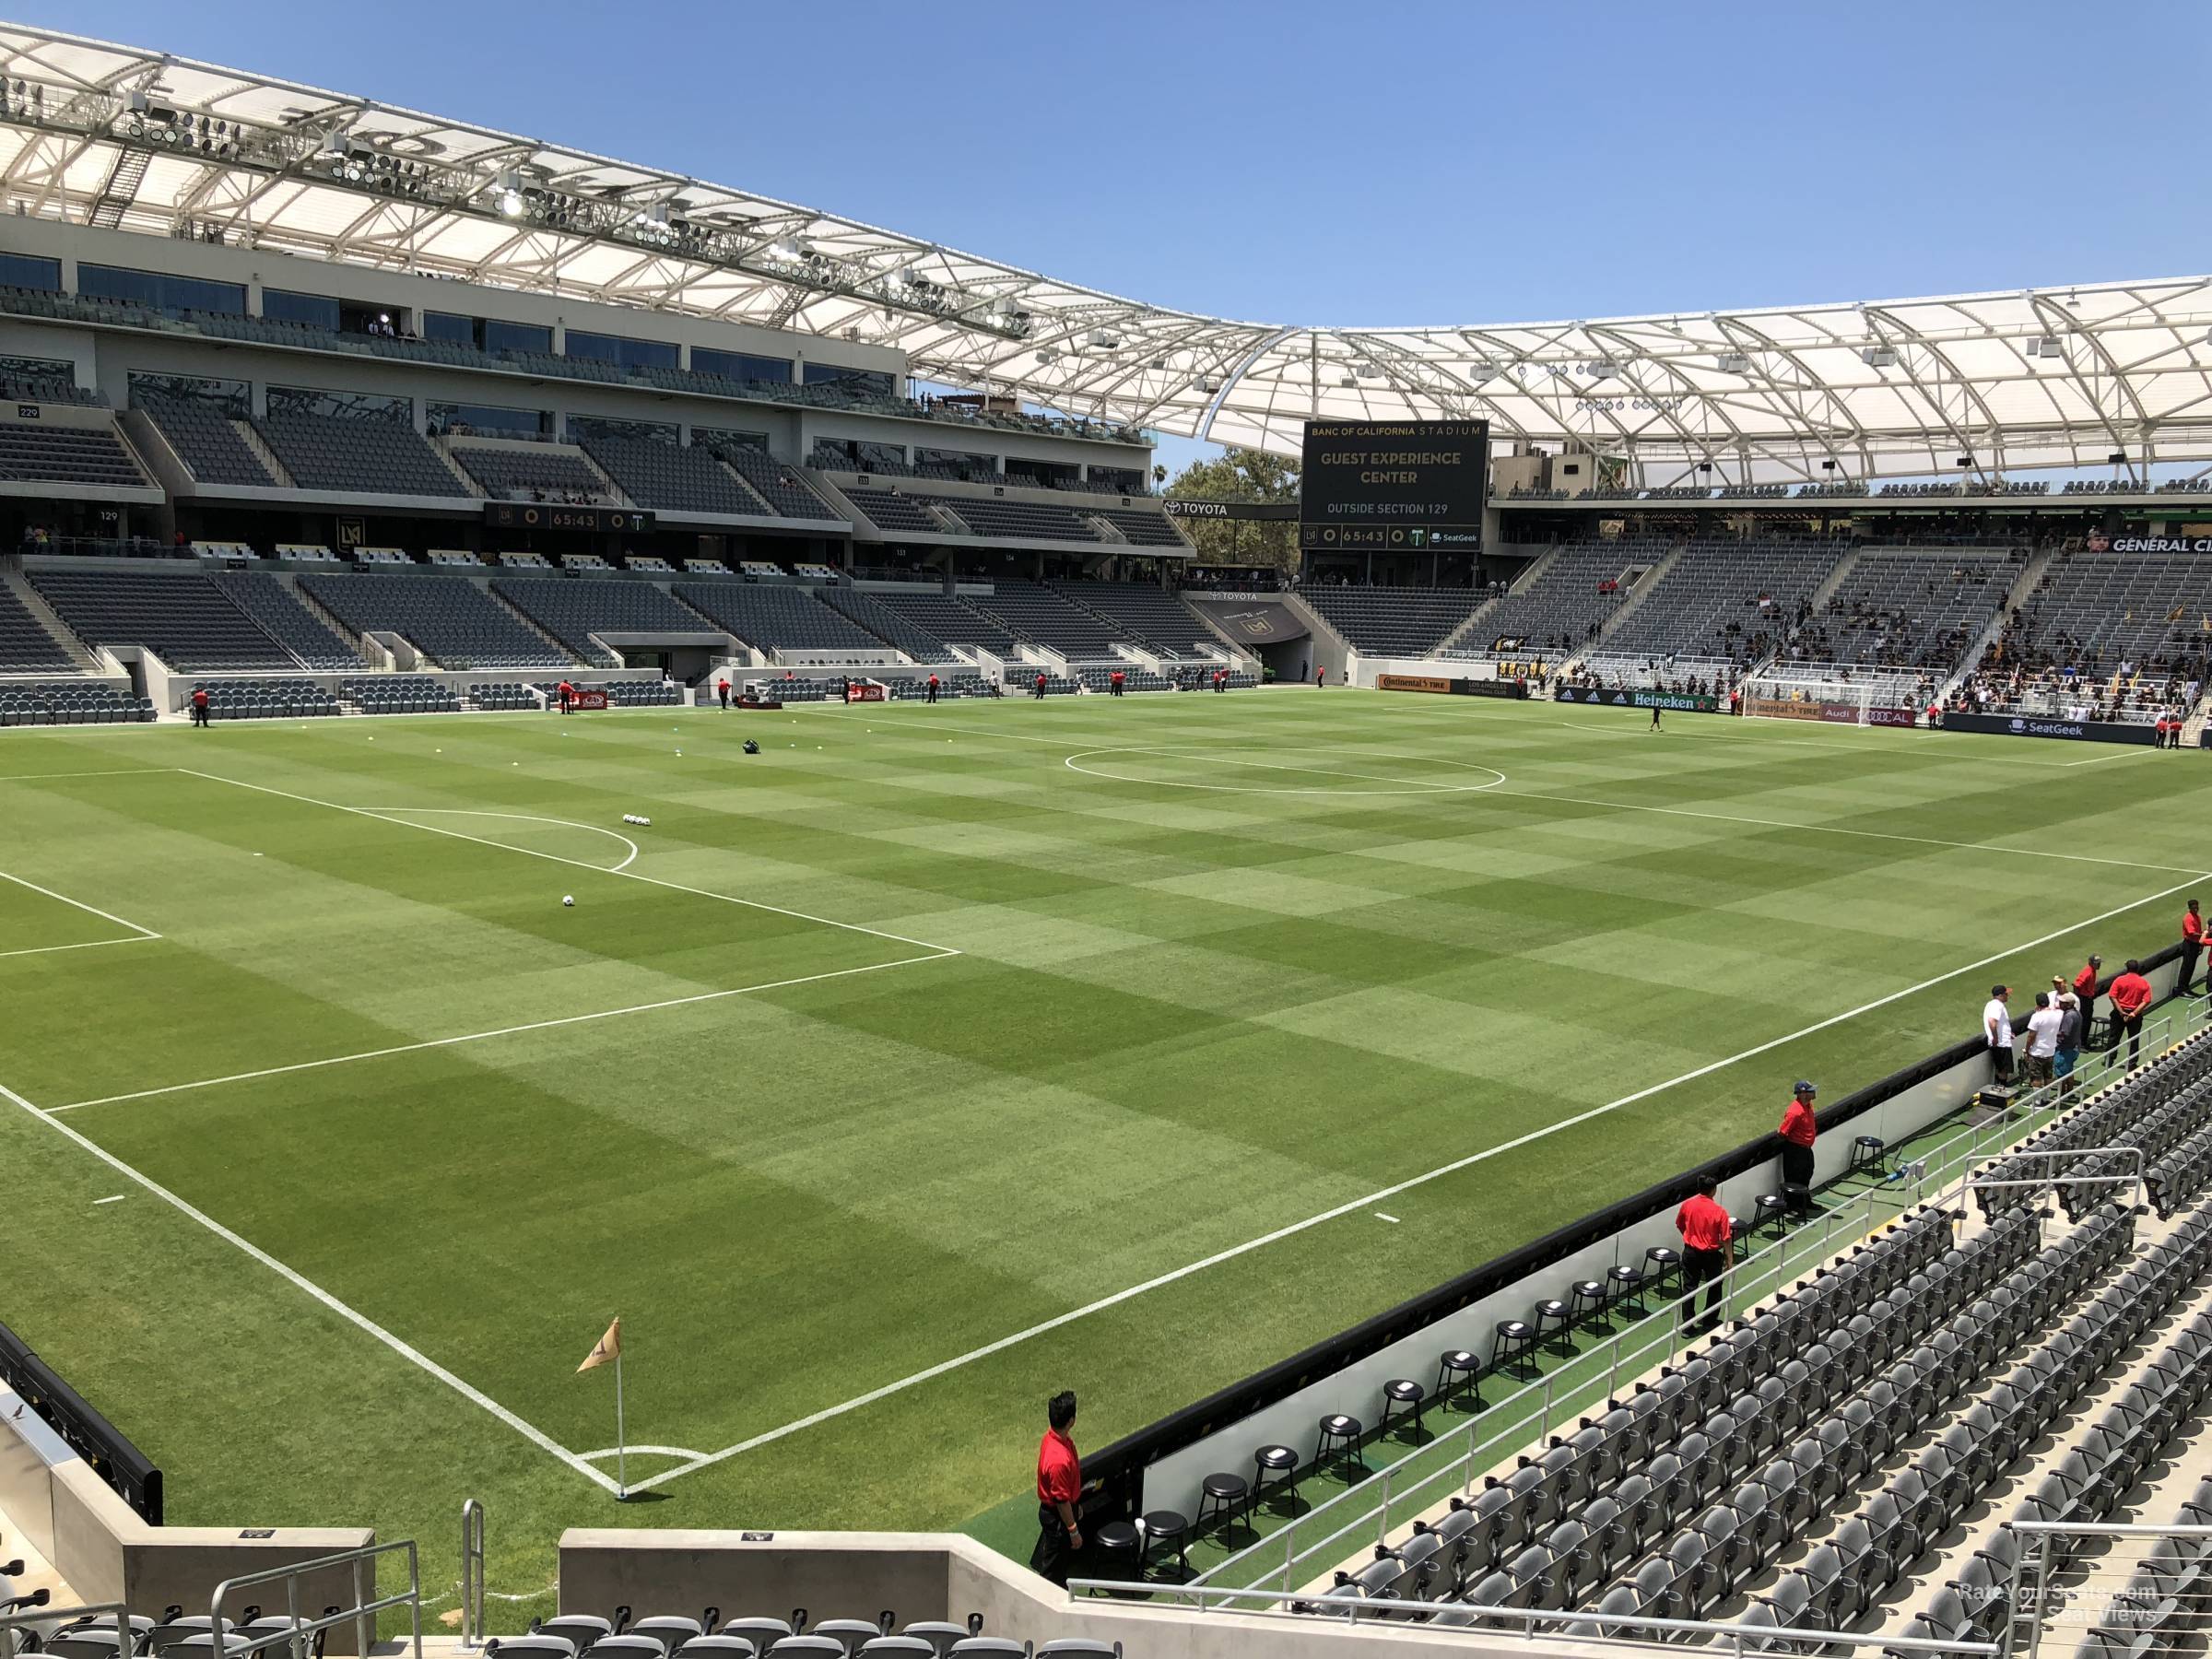 View from Section 118 at Banc of California Stadium